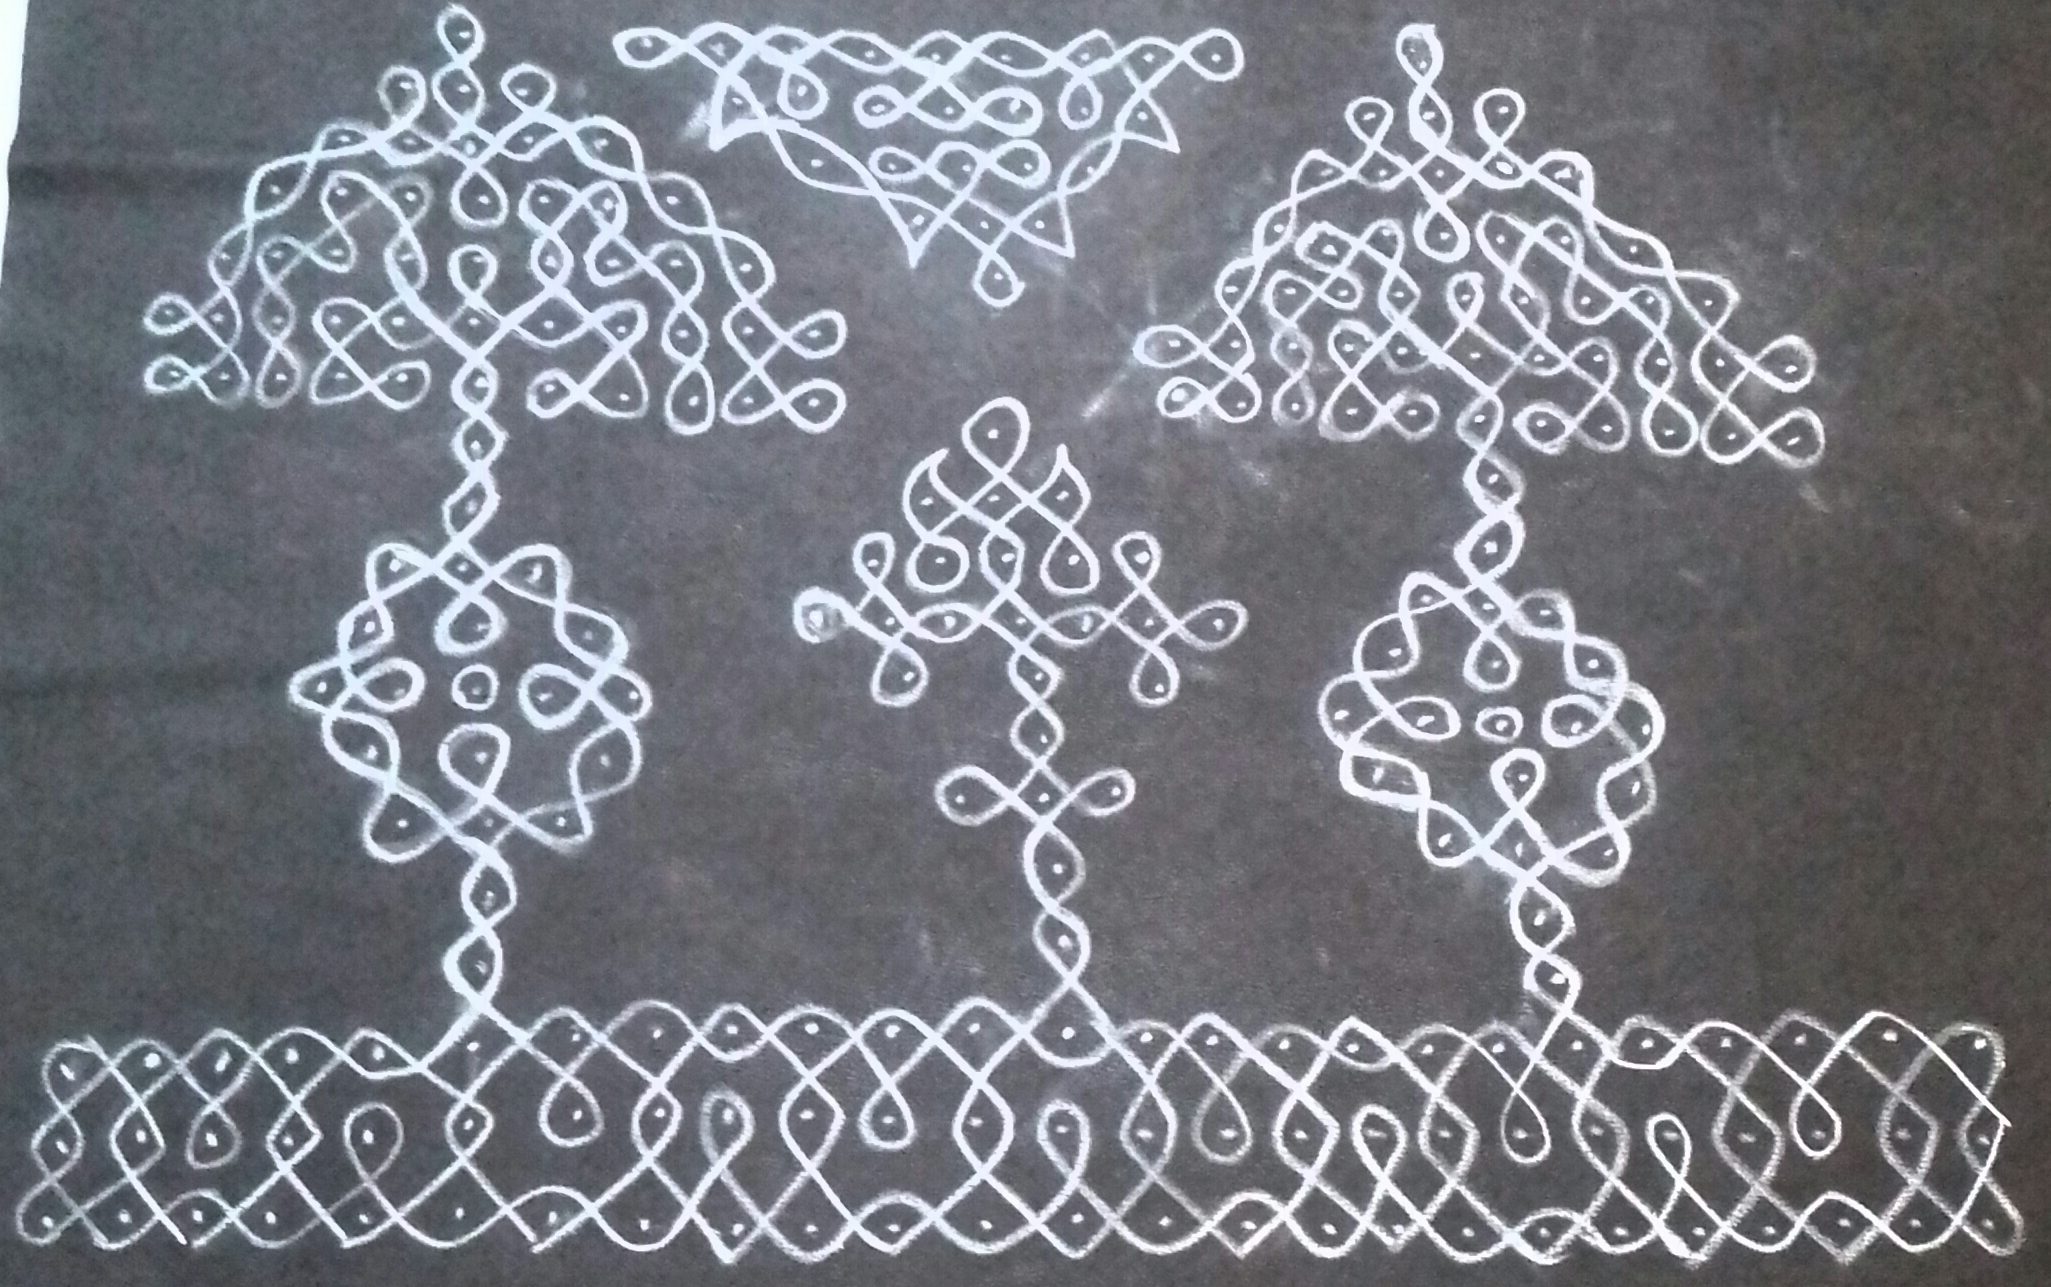 Sikku kolam with 25 dots for contest